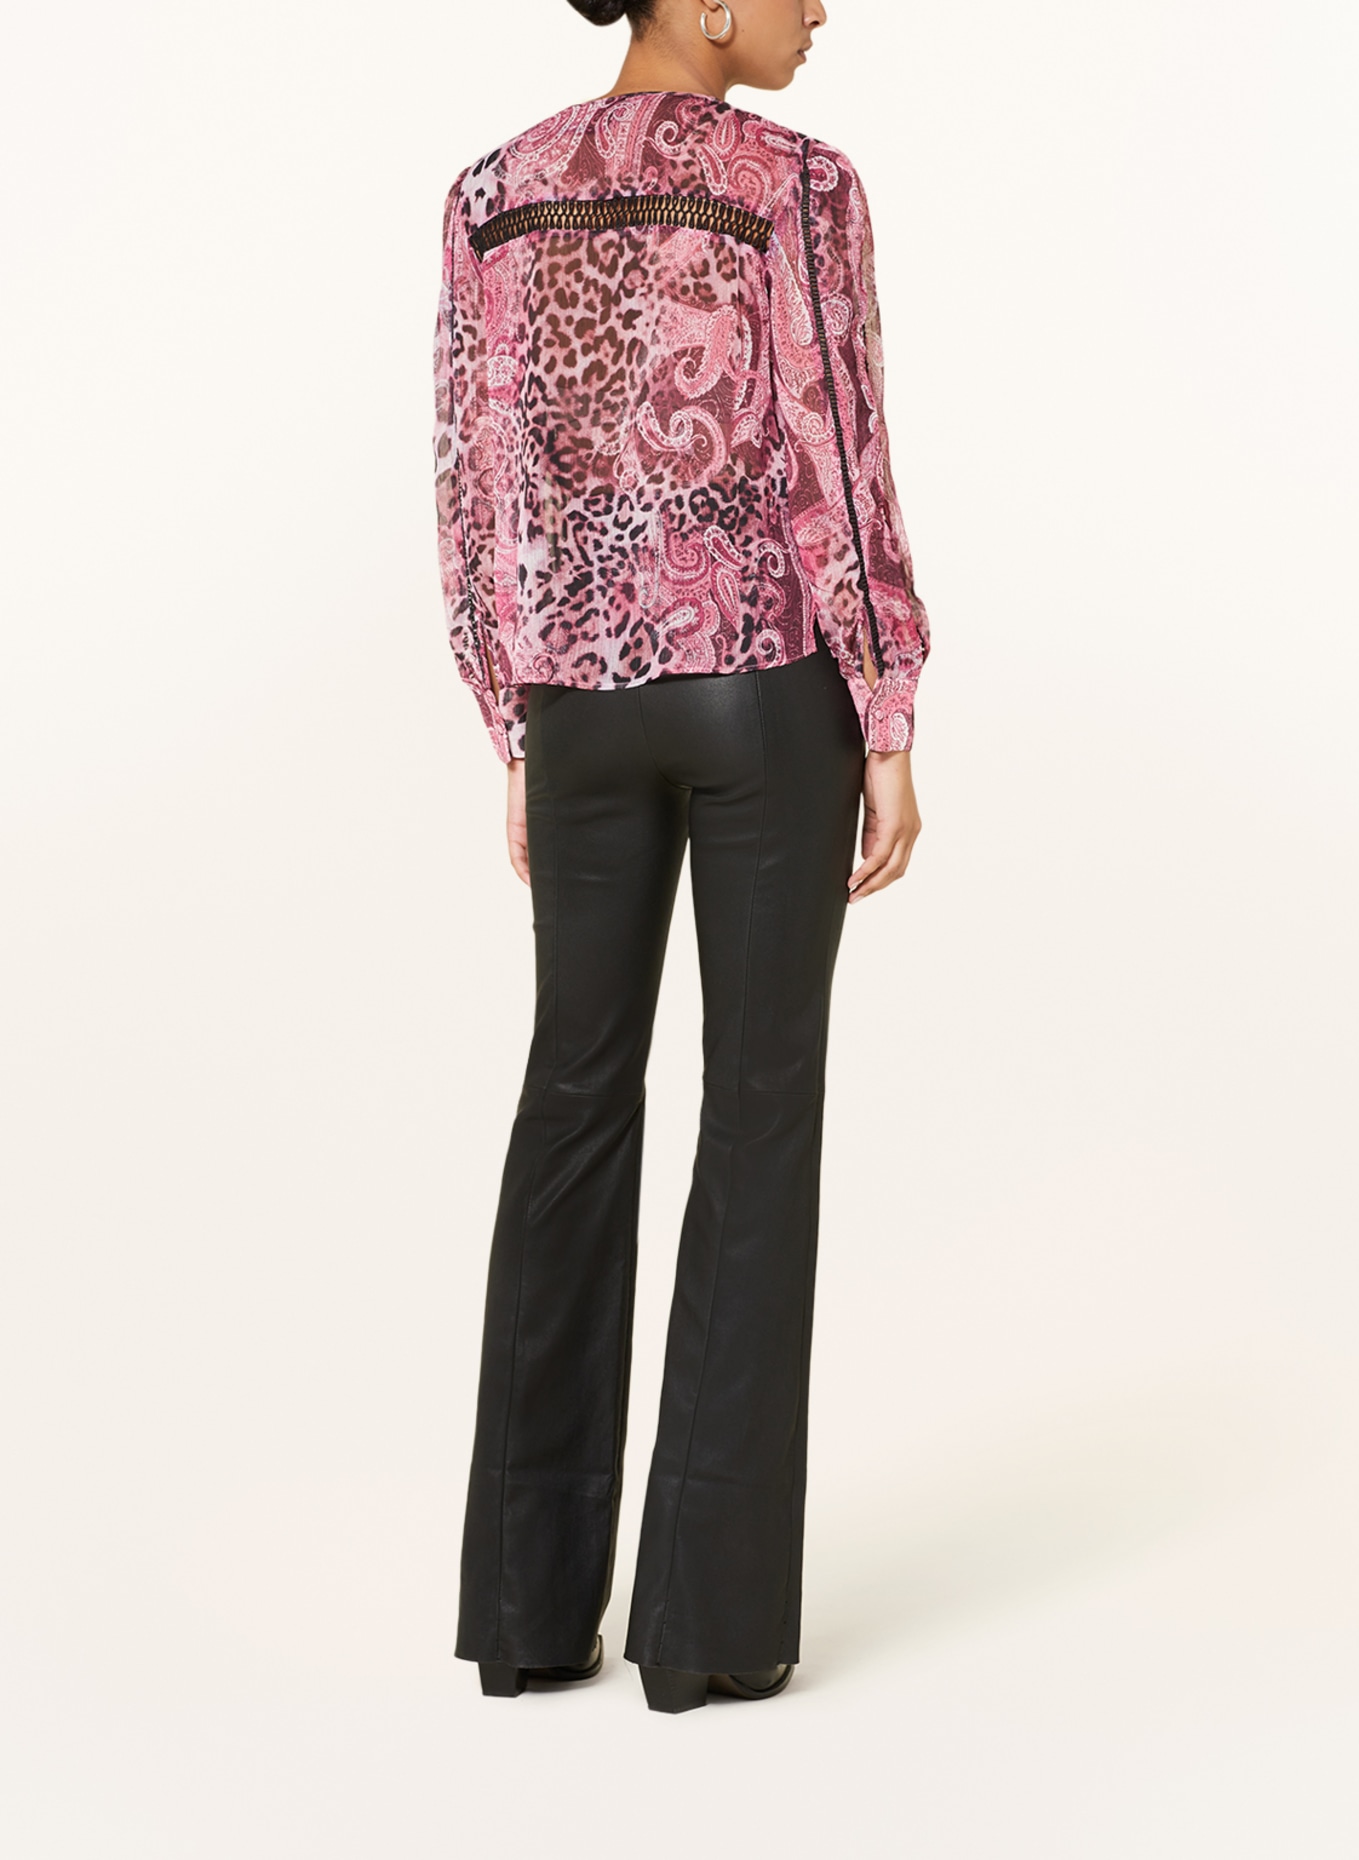 GUESS Shirt blouse BRIGIDA with broderie anglaise, Color: FUCHSIA/ BLACK/ LIGHT PINK (Image 3)